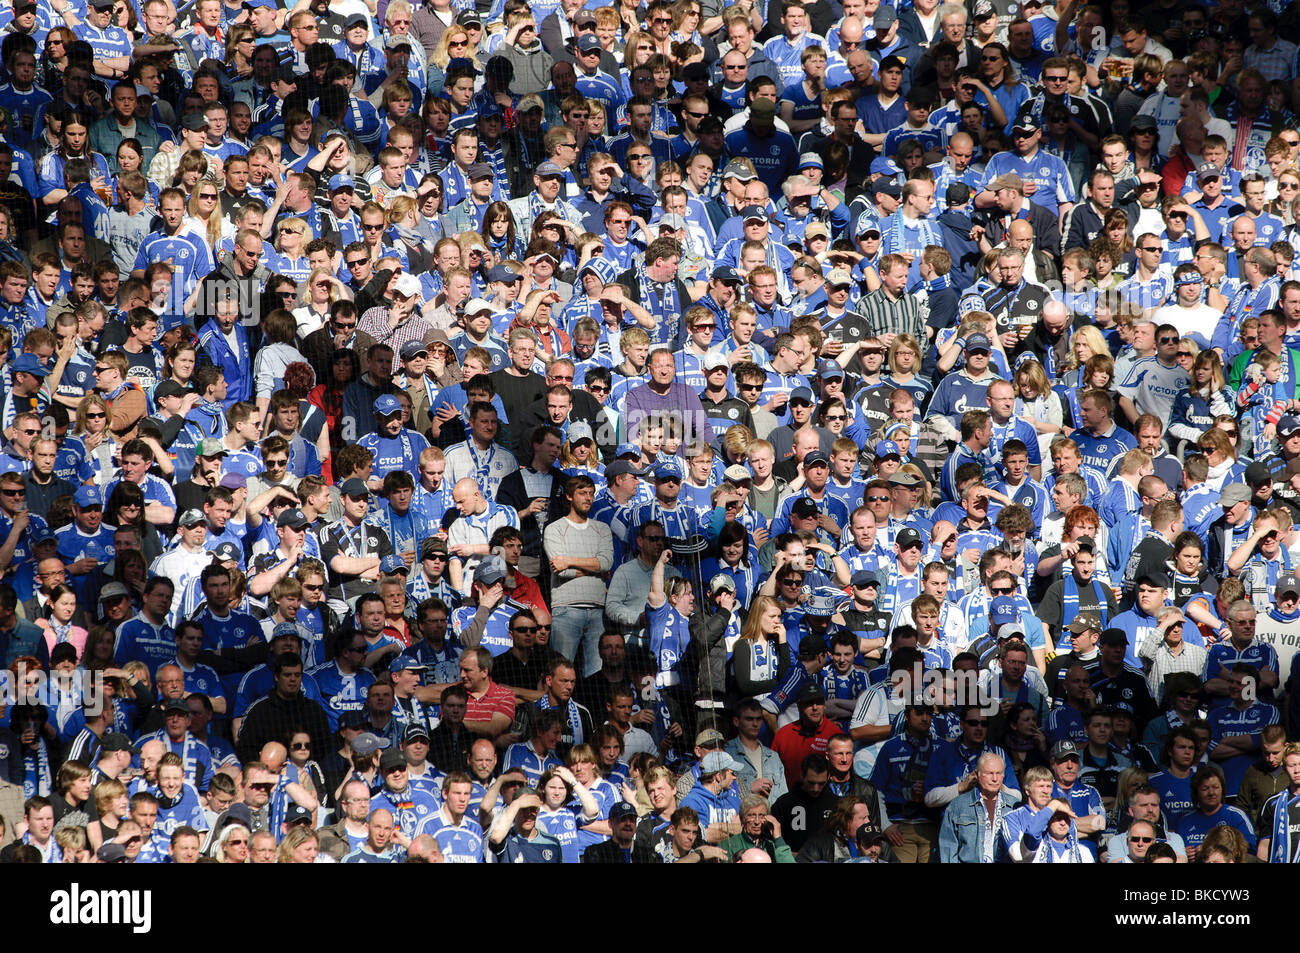 football fans crowd the stands in Schalke Arena, home of german football club Schalke 04 Stock Photo